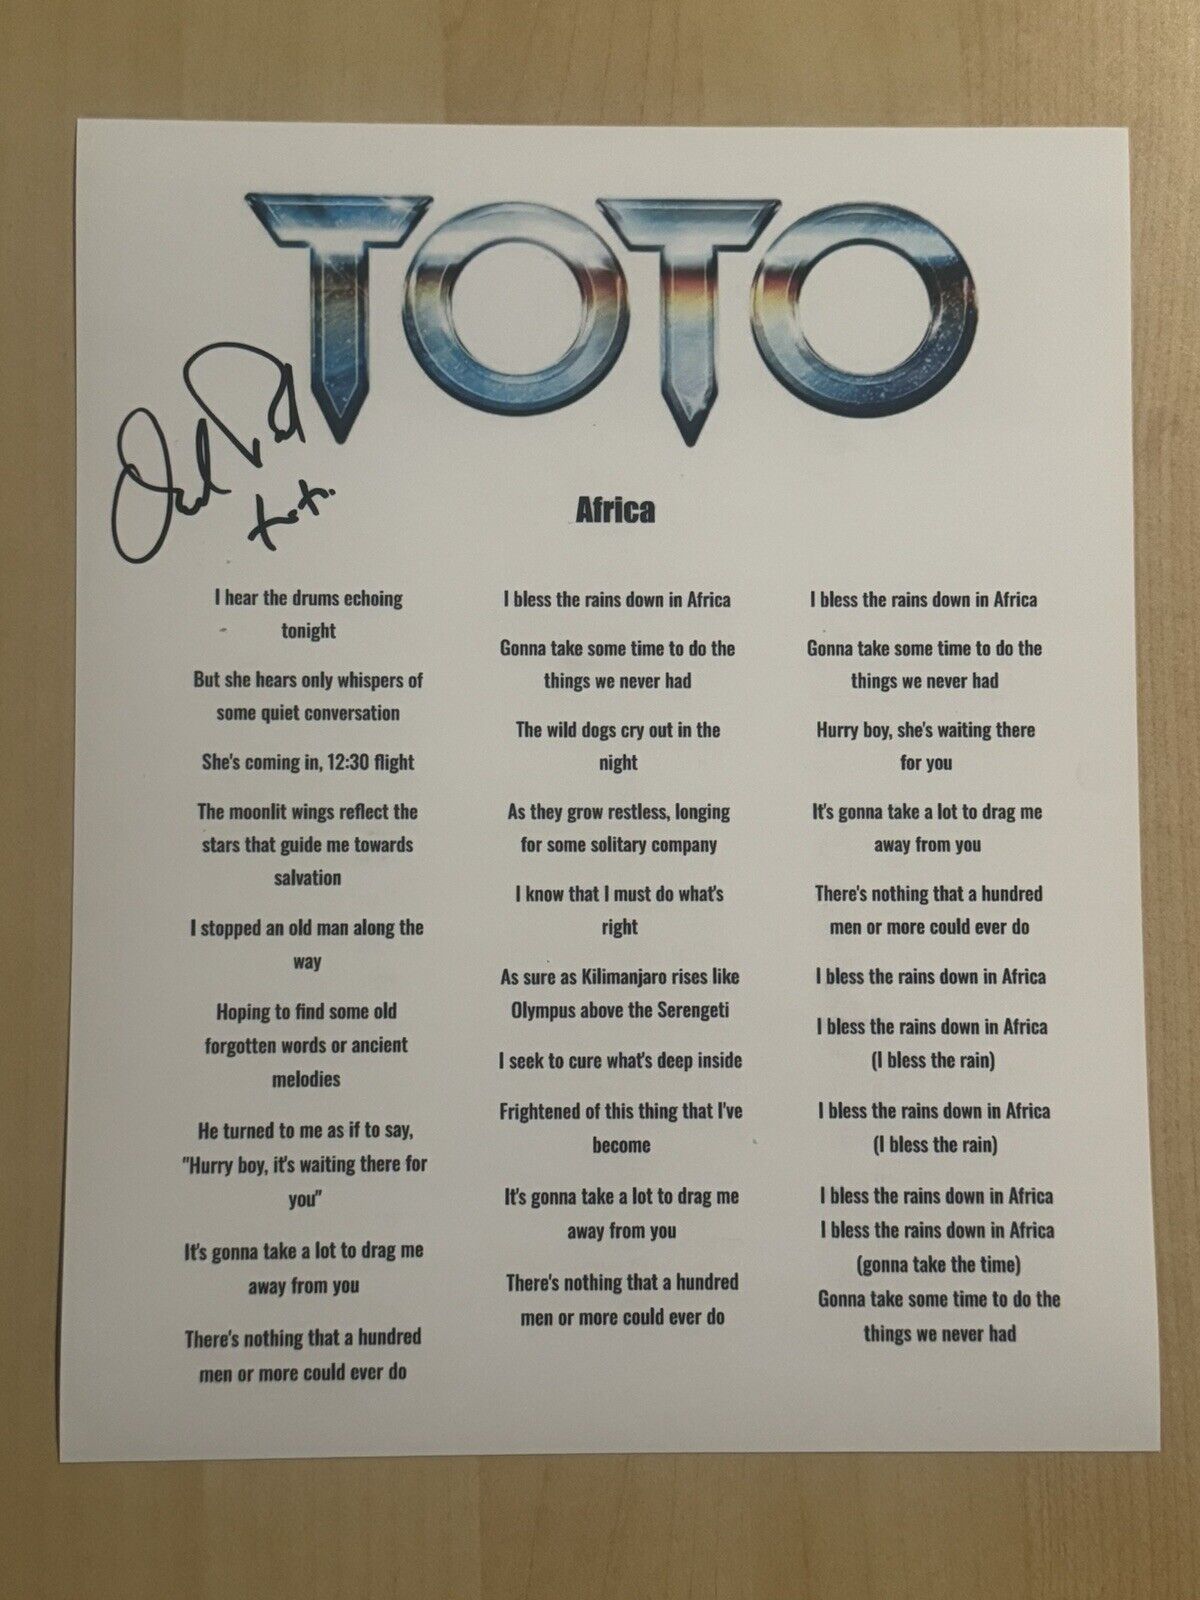 DAVID PAICH SIGNED AFRICA LYRIC SHEET AUTOGRAPHED TOTO BAND SINGER COA